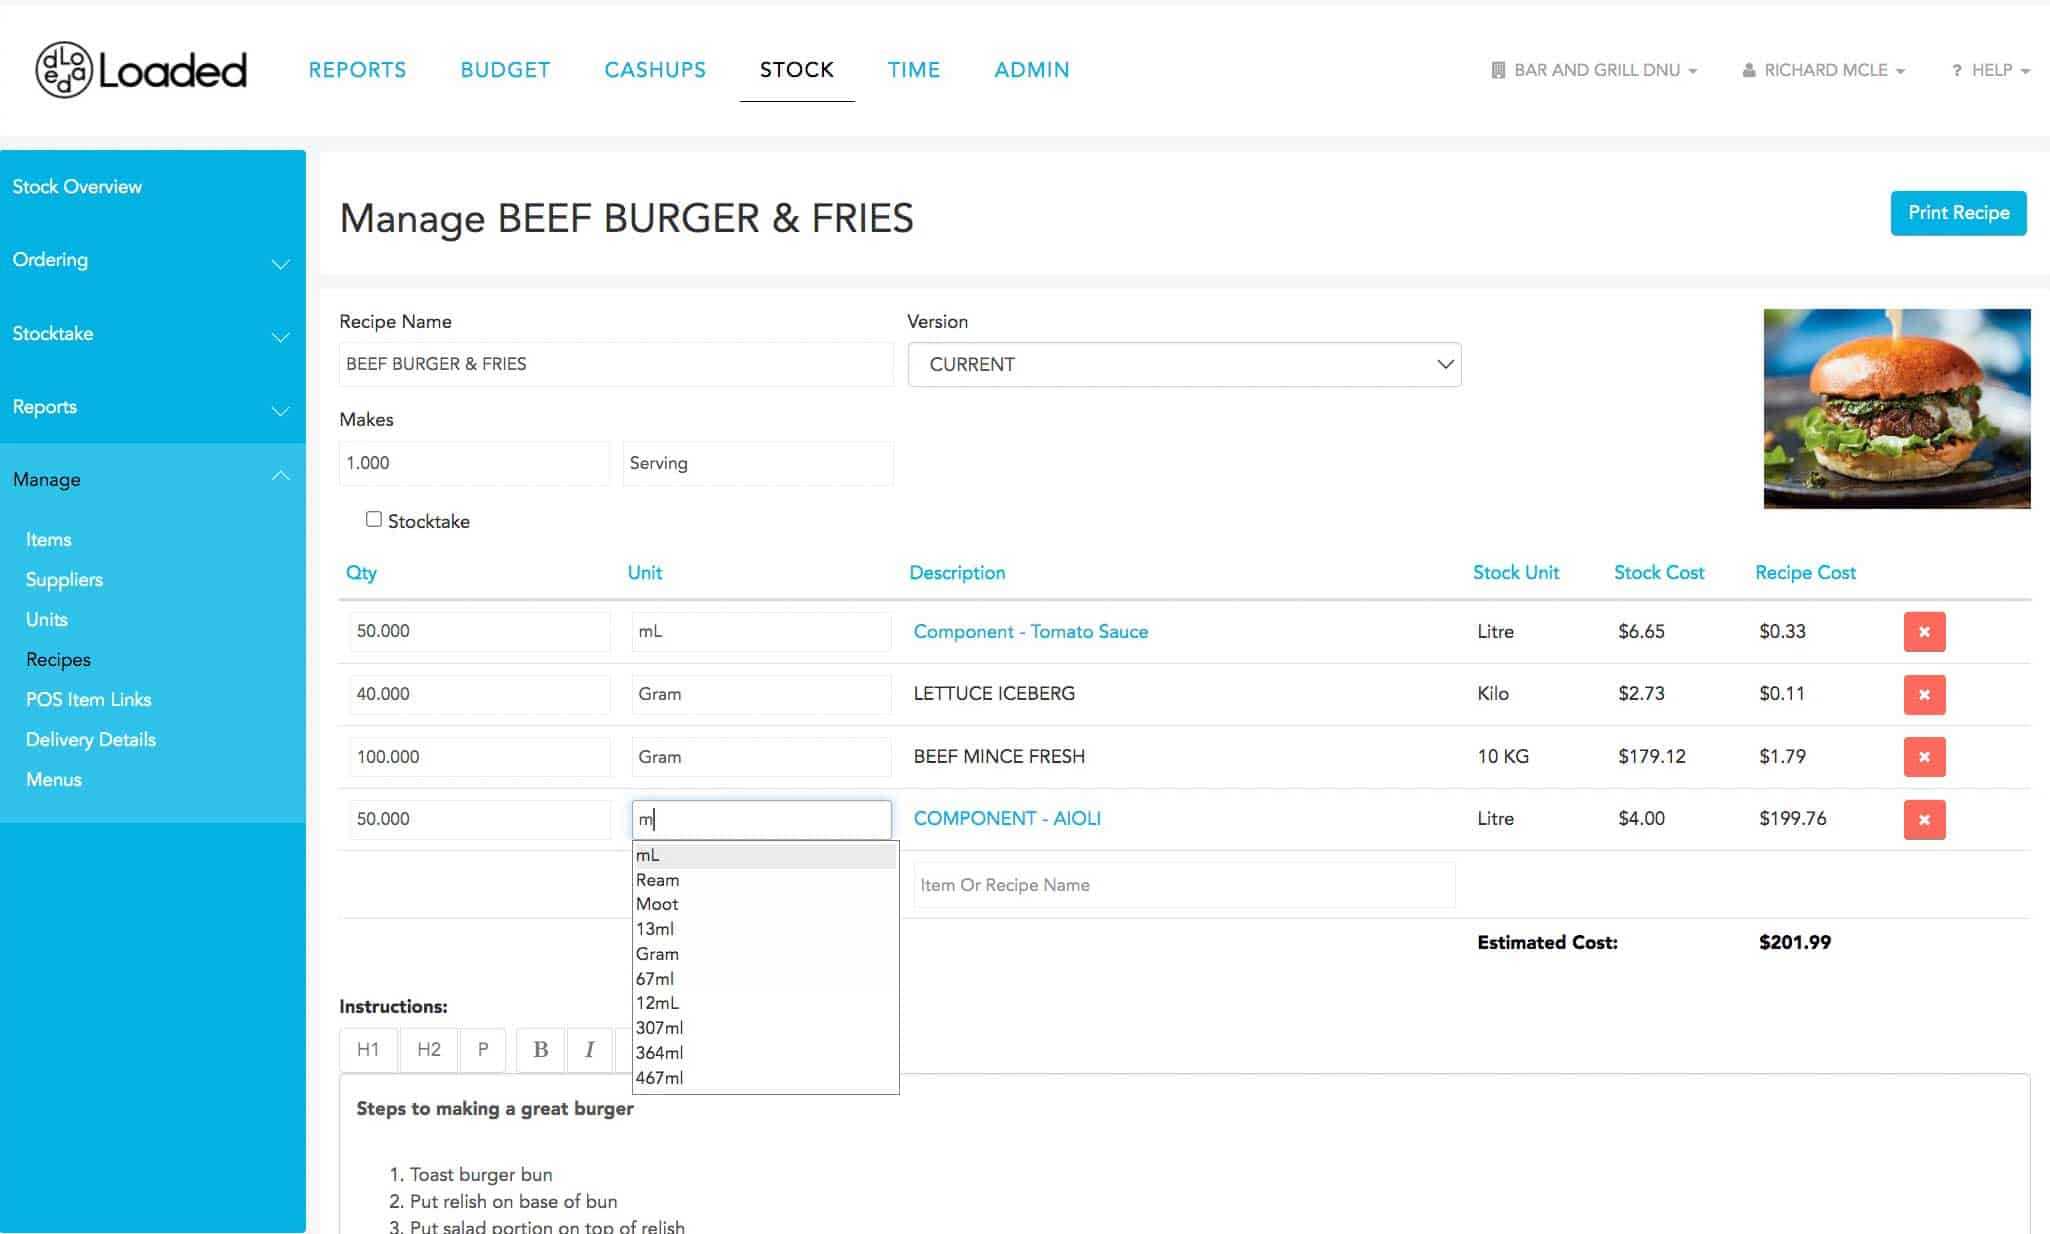 Build your recipes once and never have to worry about updating prices again.